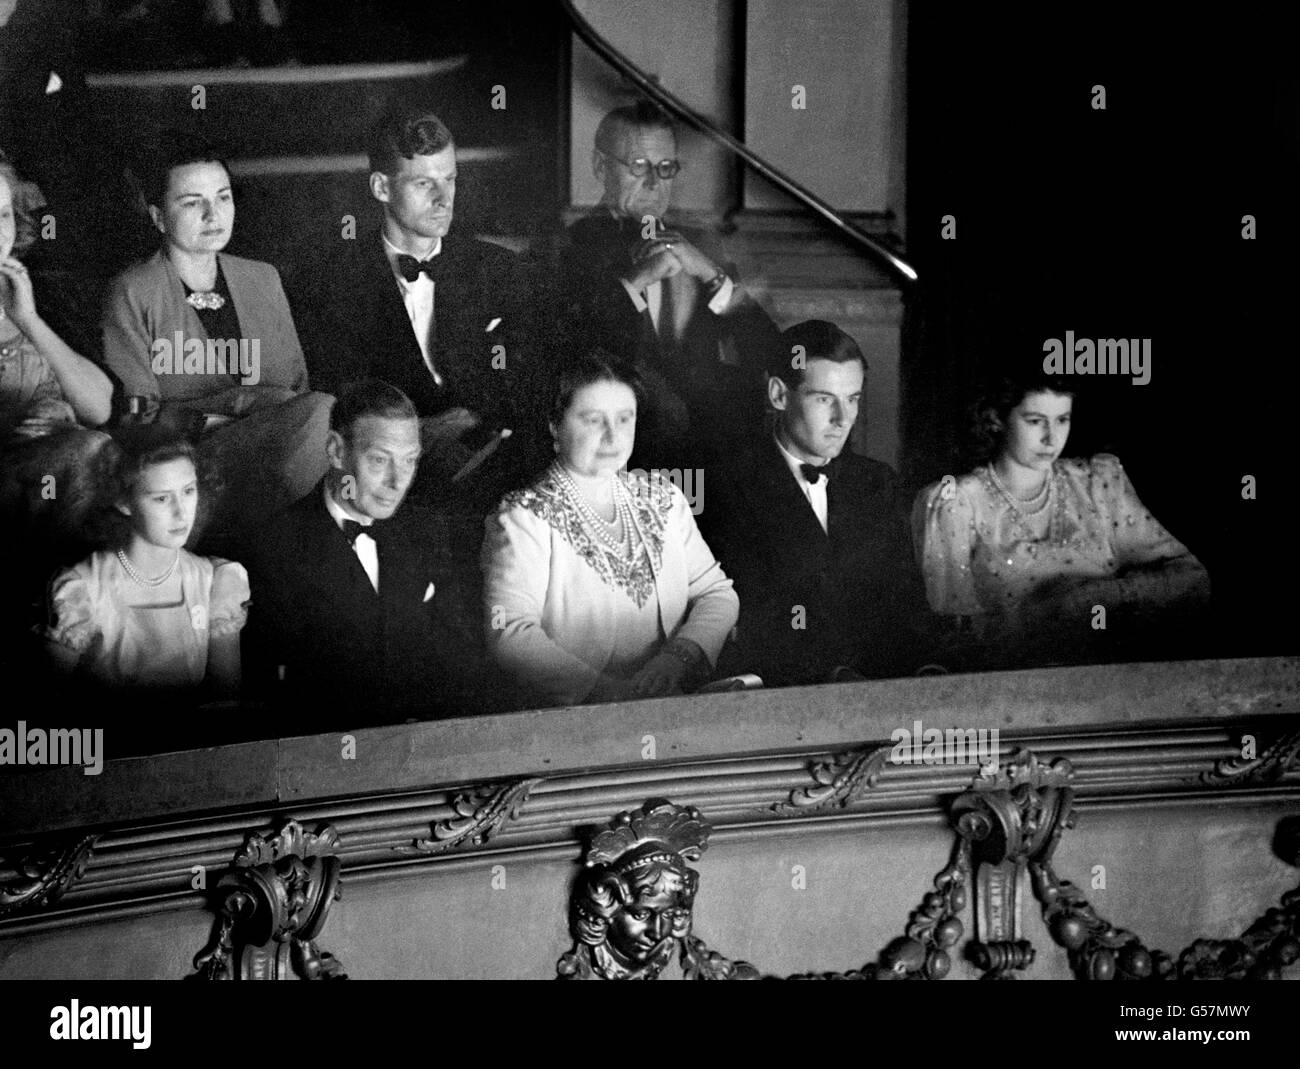 Royalty - King George VI and Family - Strand Theatre, London Stock Photo